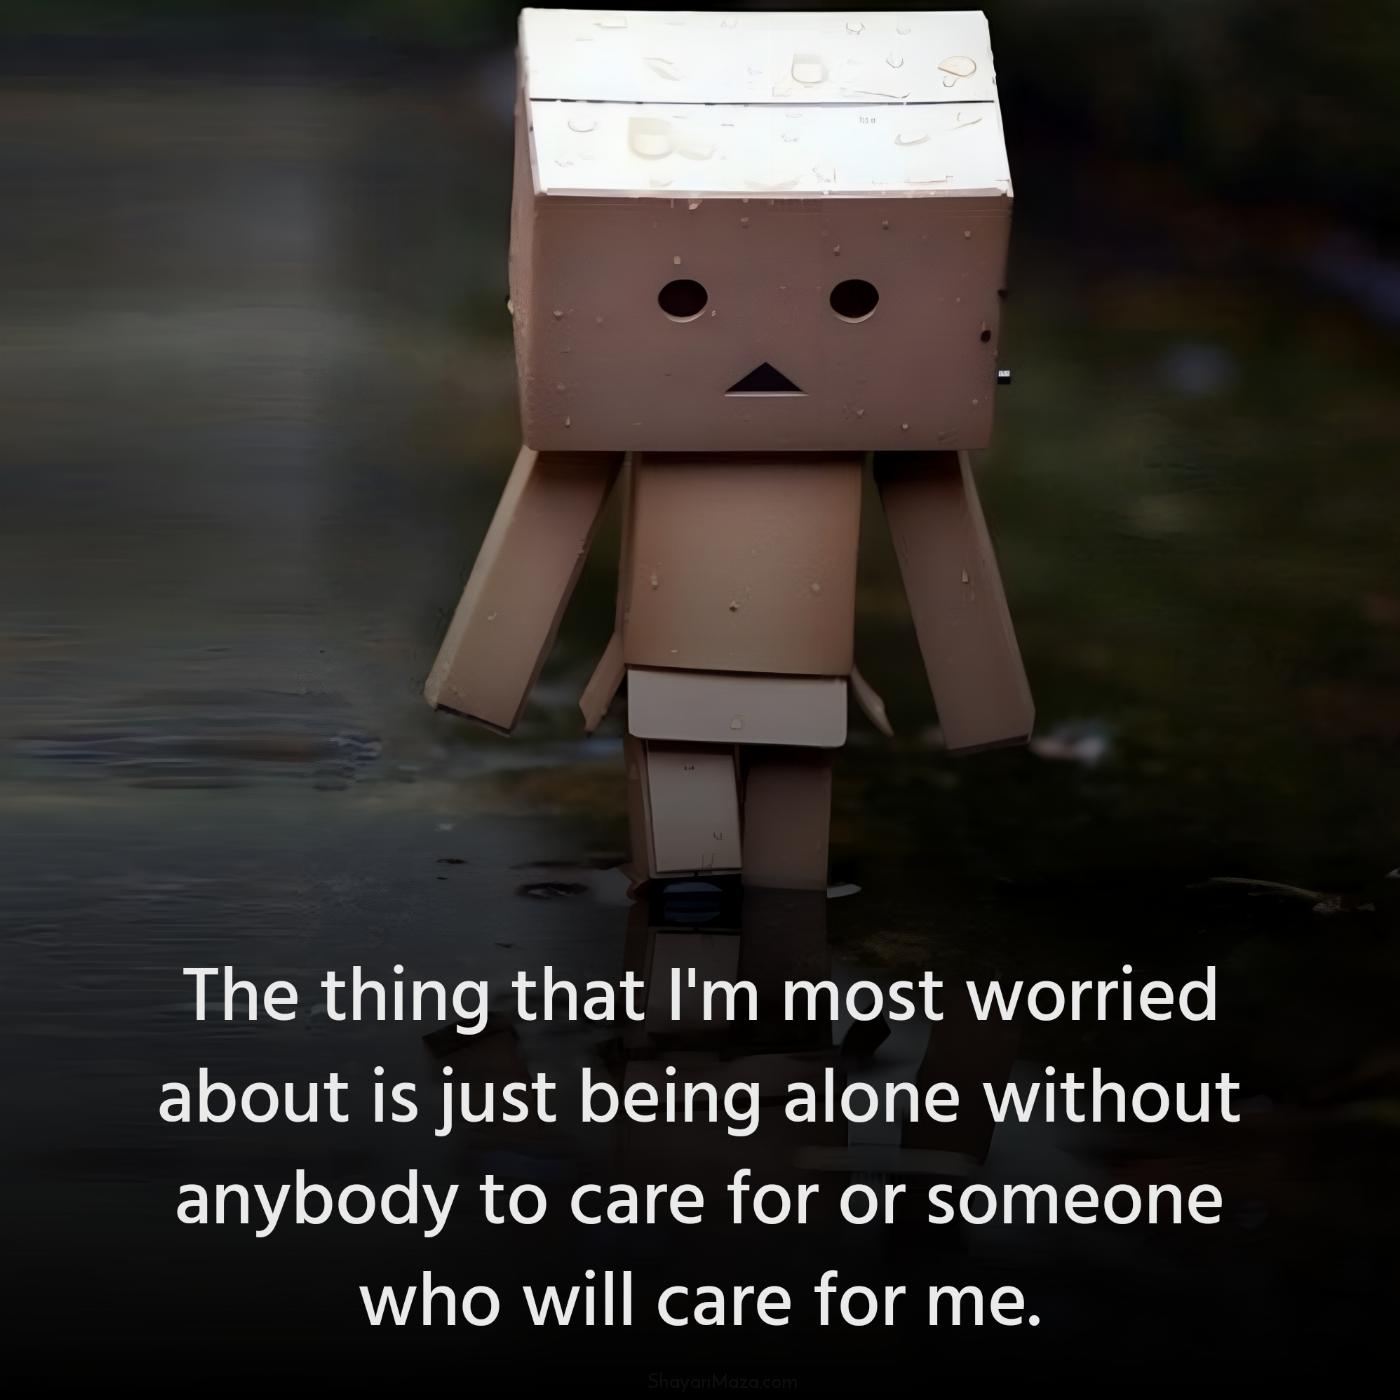 The thing that I'm most worried about is just being alone